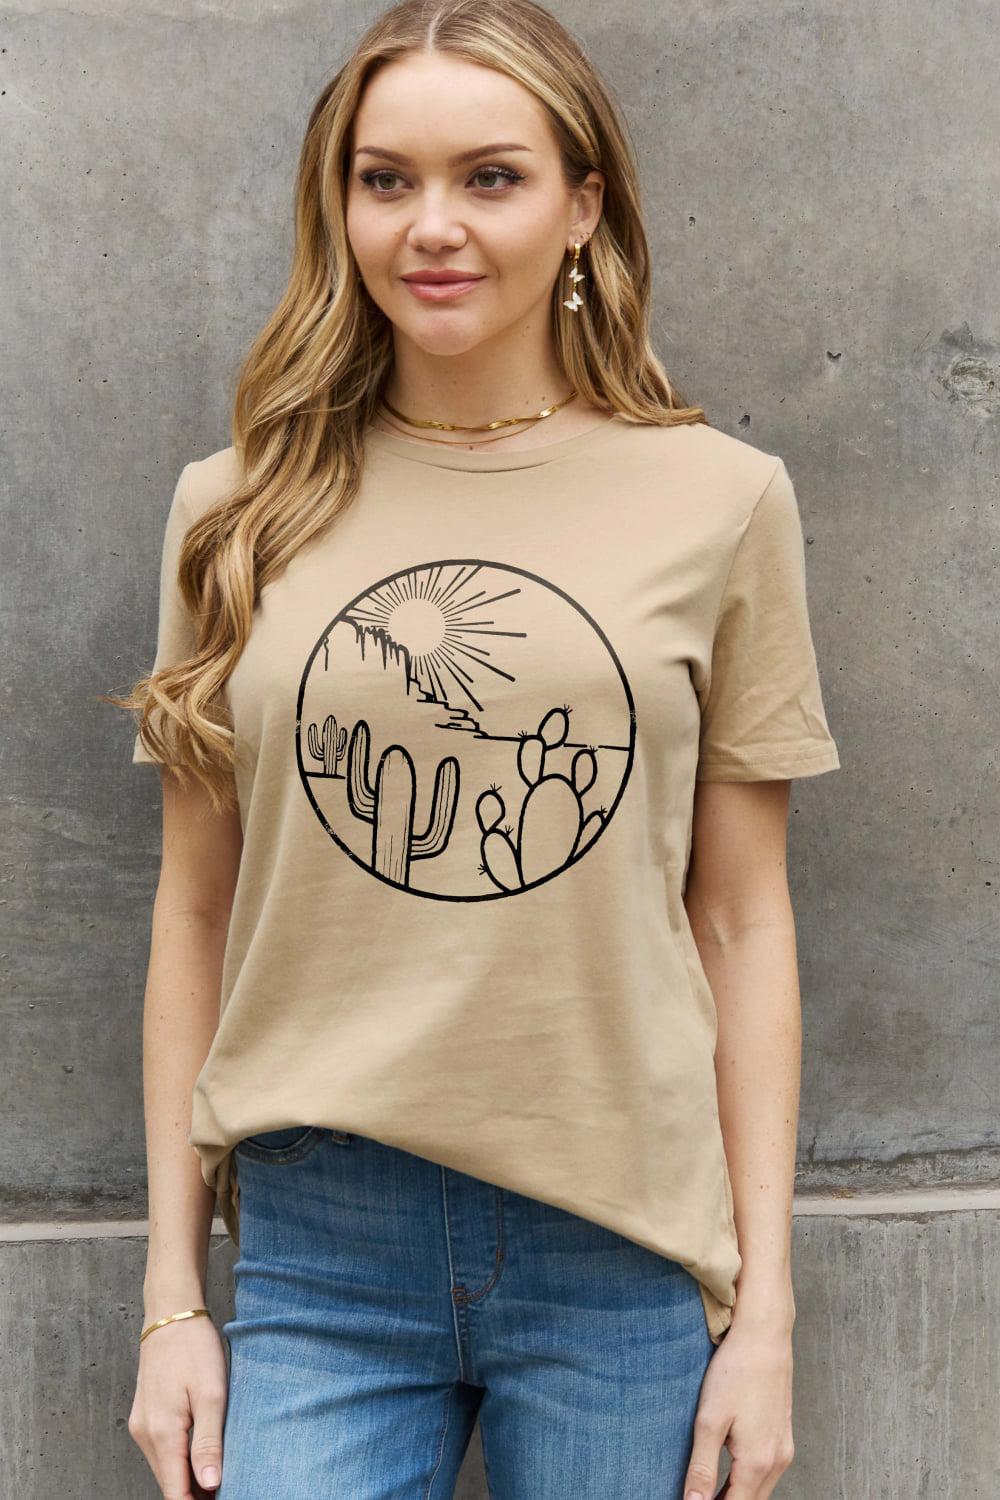 Simply Love Full Size Desert Graphic Cotton Tee BLUE ZONE PLANET